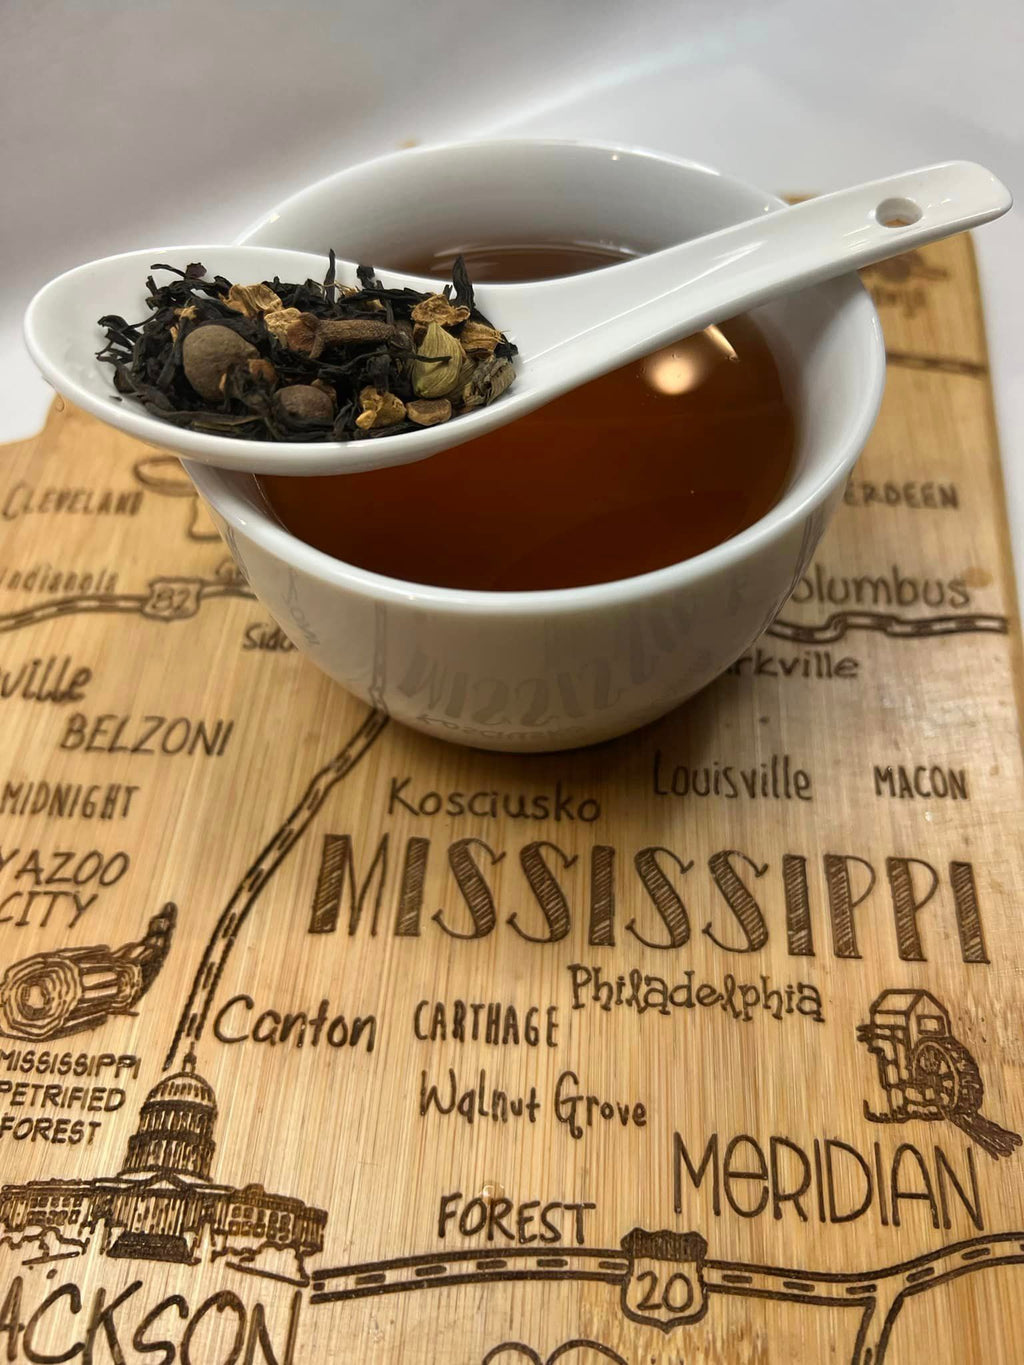 4 Culinary Tea Box with The Great Mississippi Tea Company Cookbook